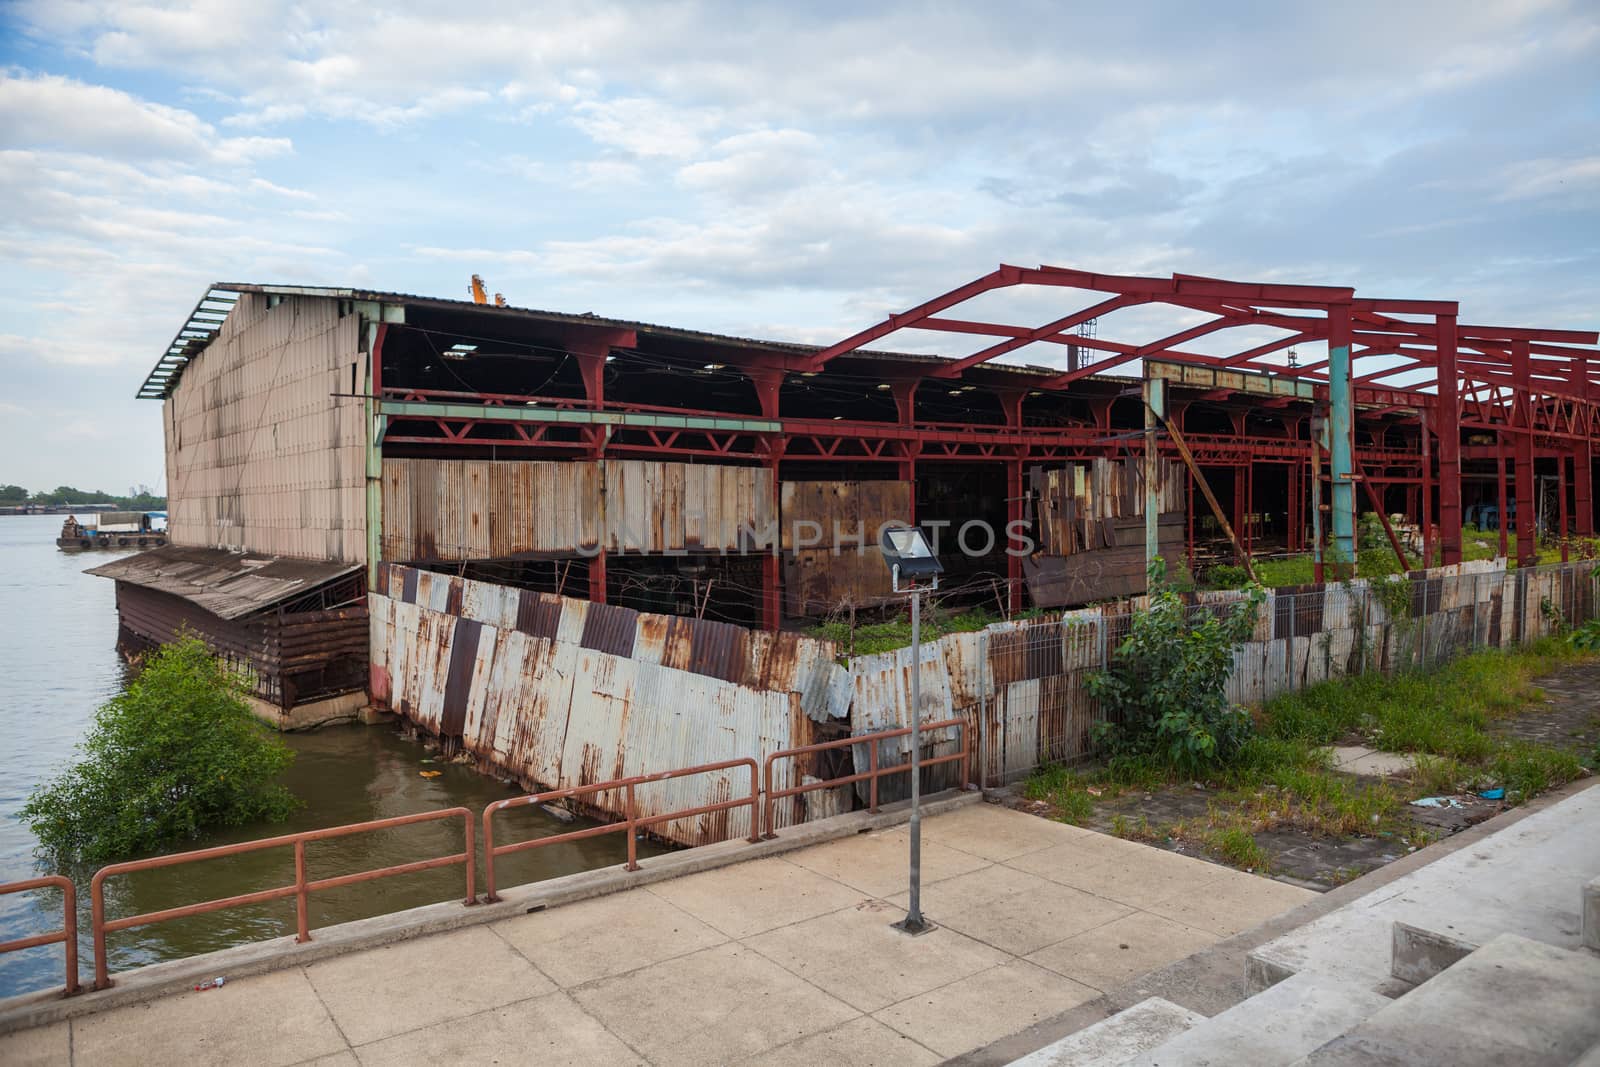 Old abandoned factory during demolition near river